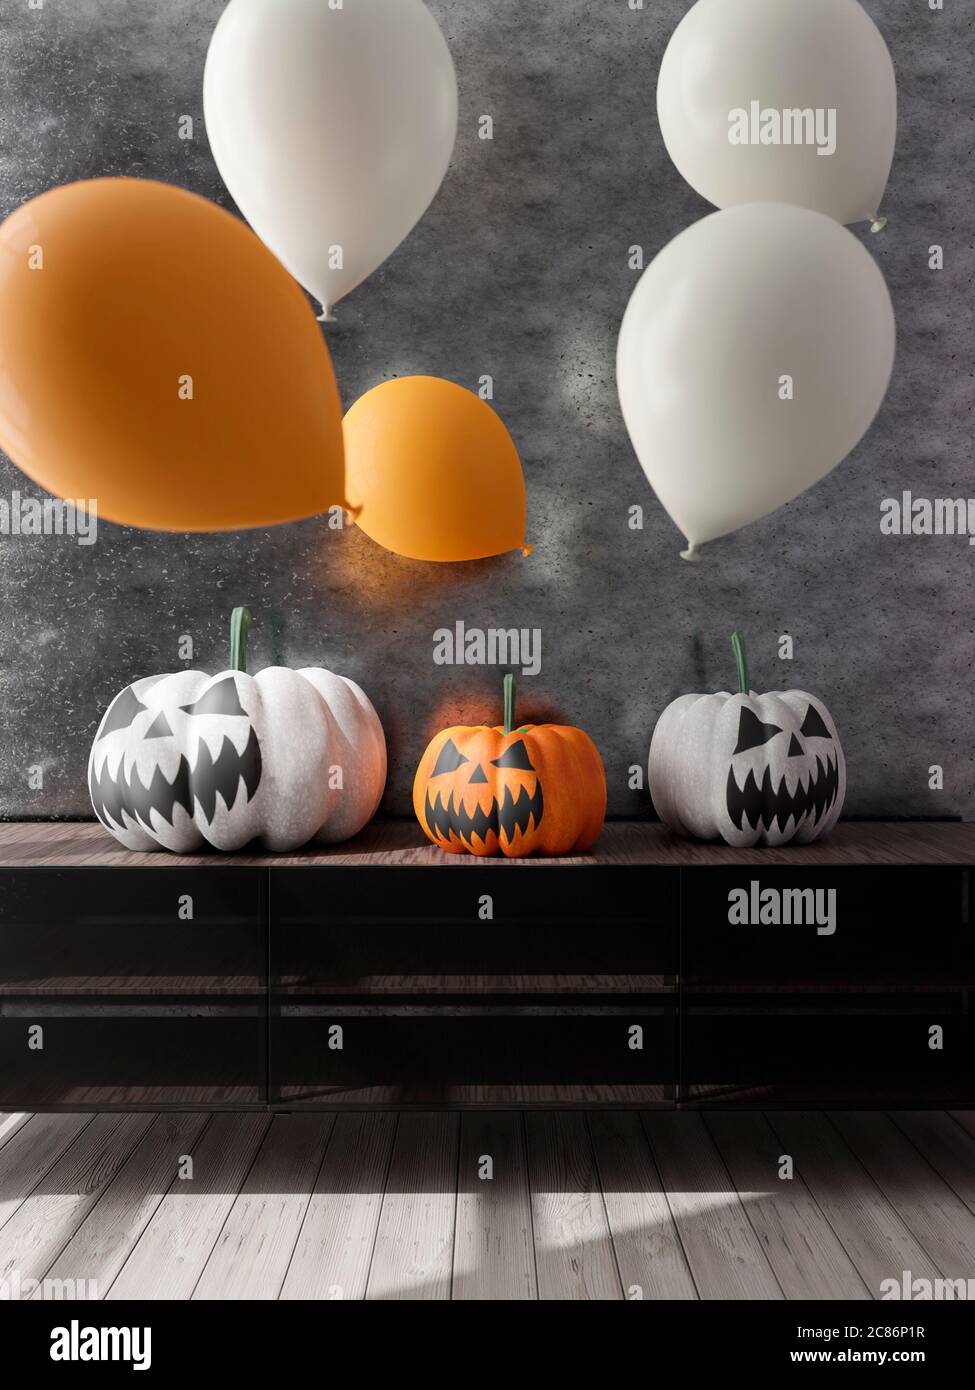 3D illustration of living room Halloween decoration. Pumpkins and balloons. 3D rendering Stock Photo